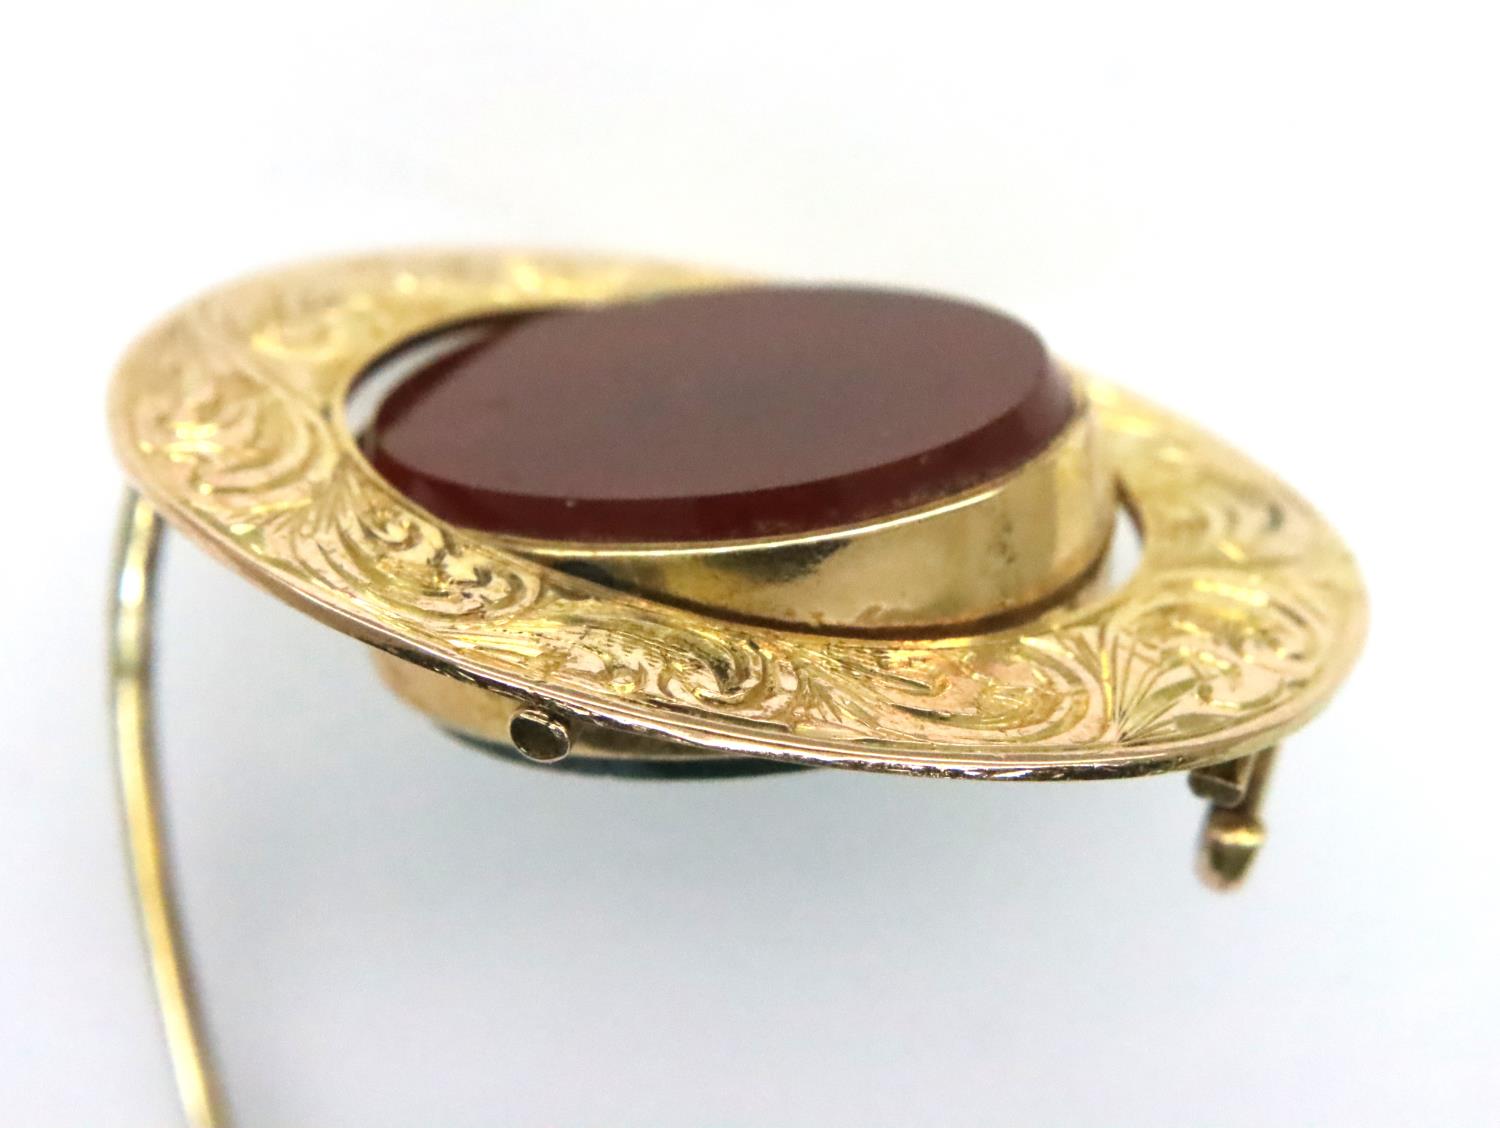 19th century 9ct gold swivel brooch mounted with bloodstone and carnelian, marks rubbed, L: 3 cm, - Image 3 of 3